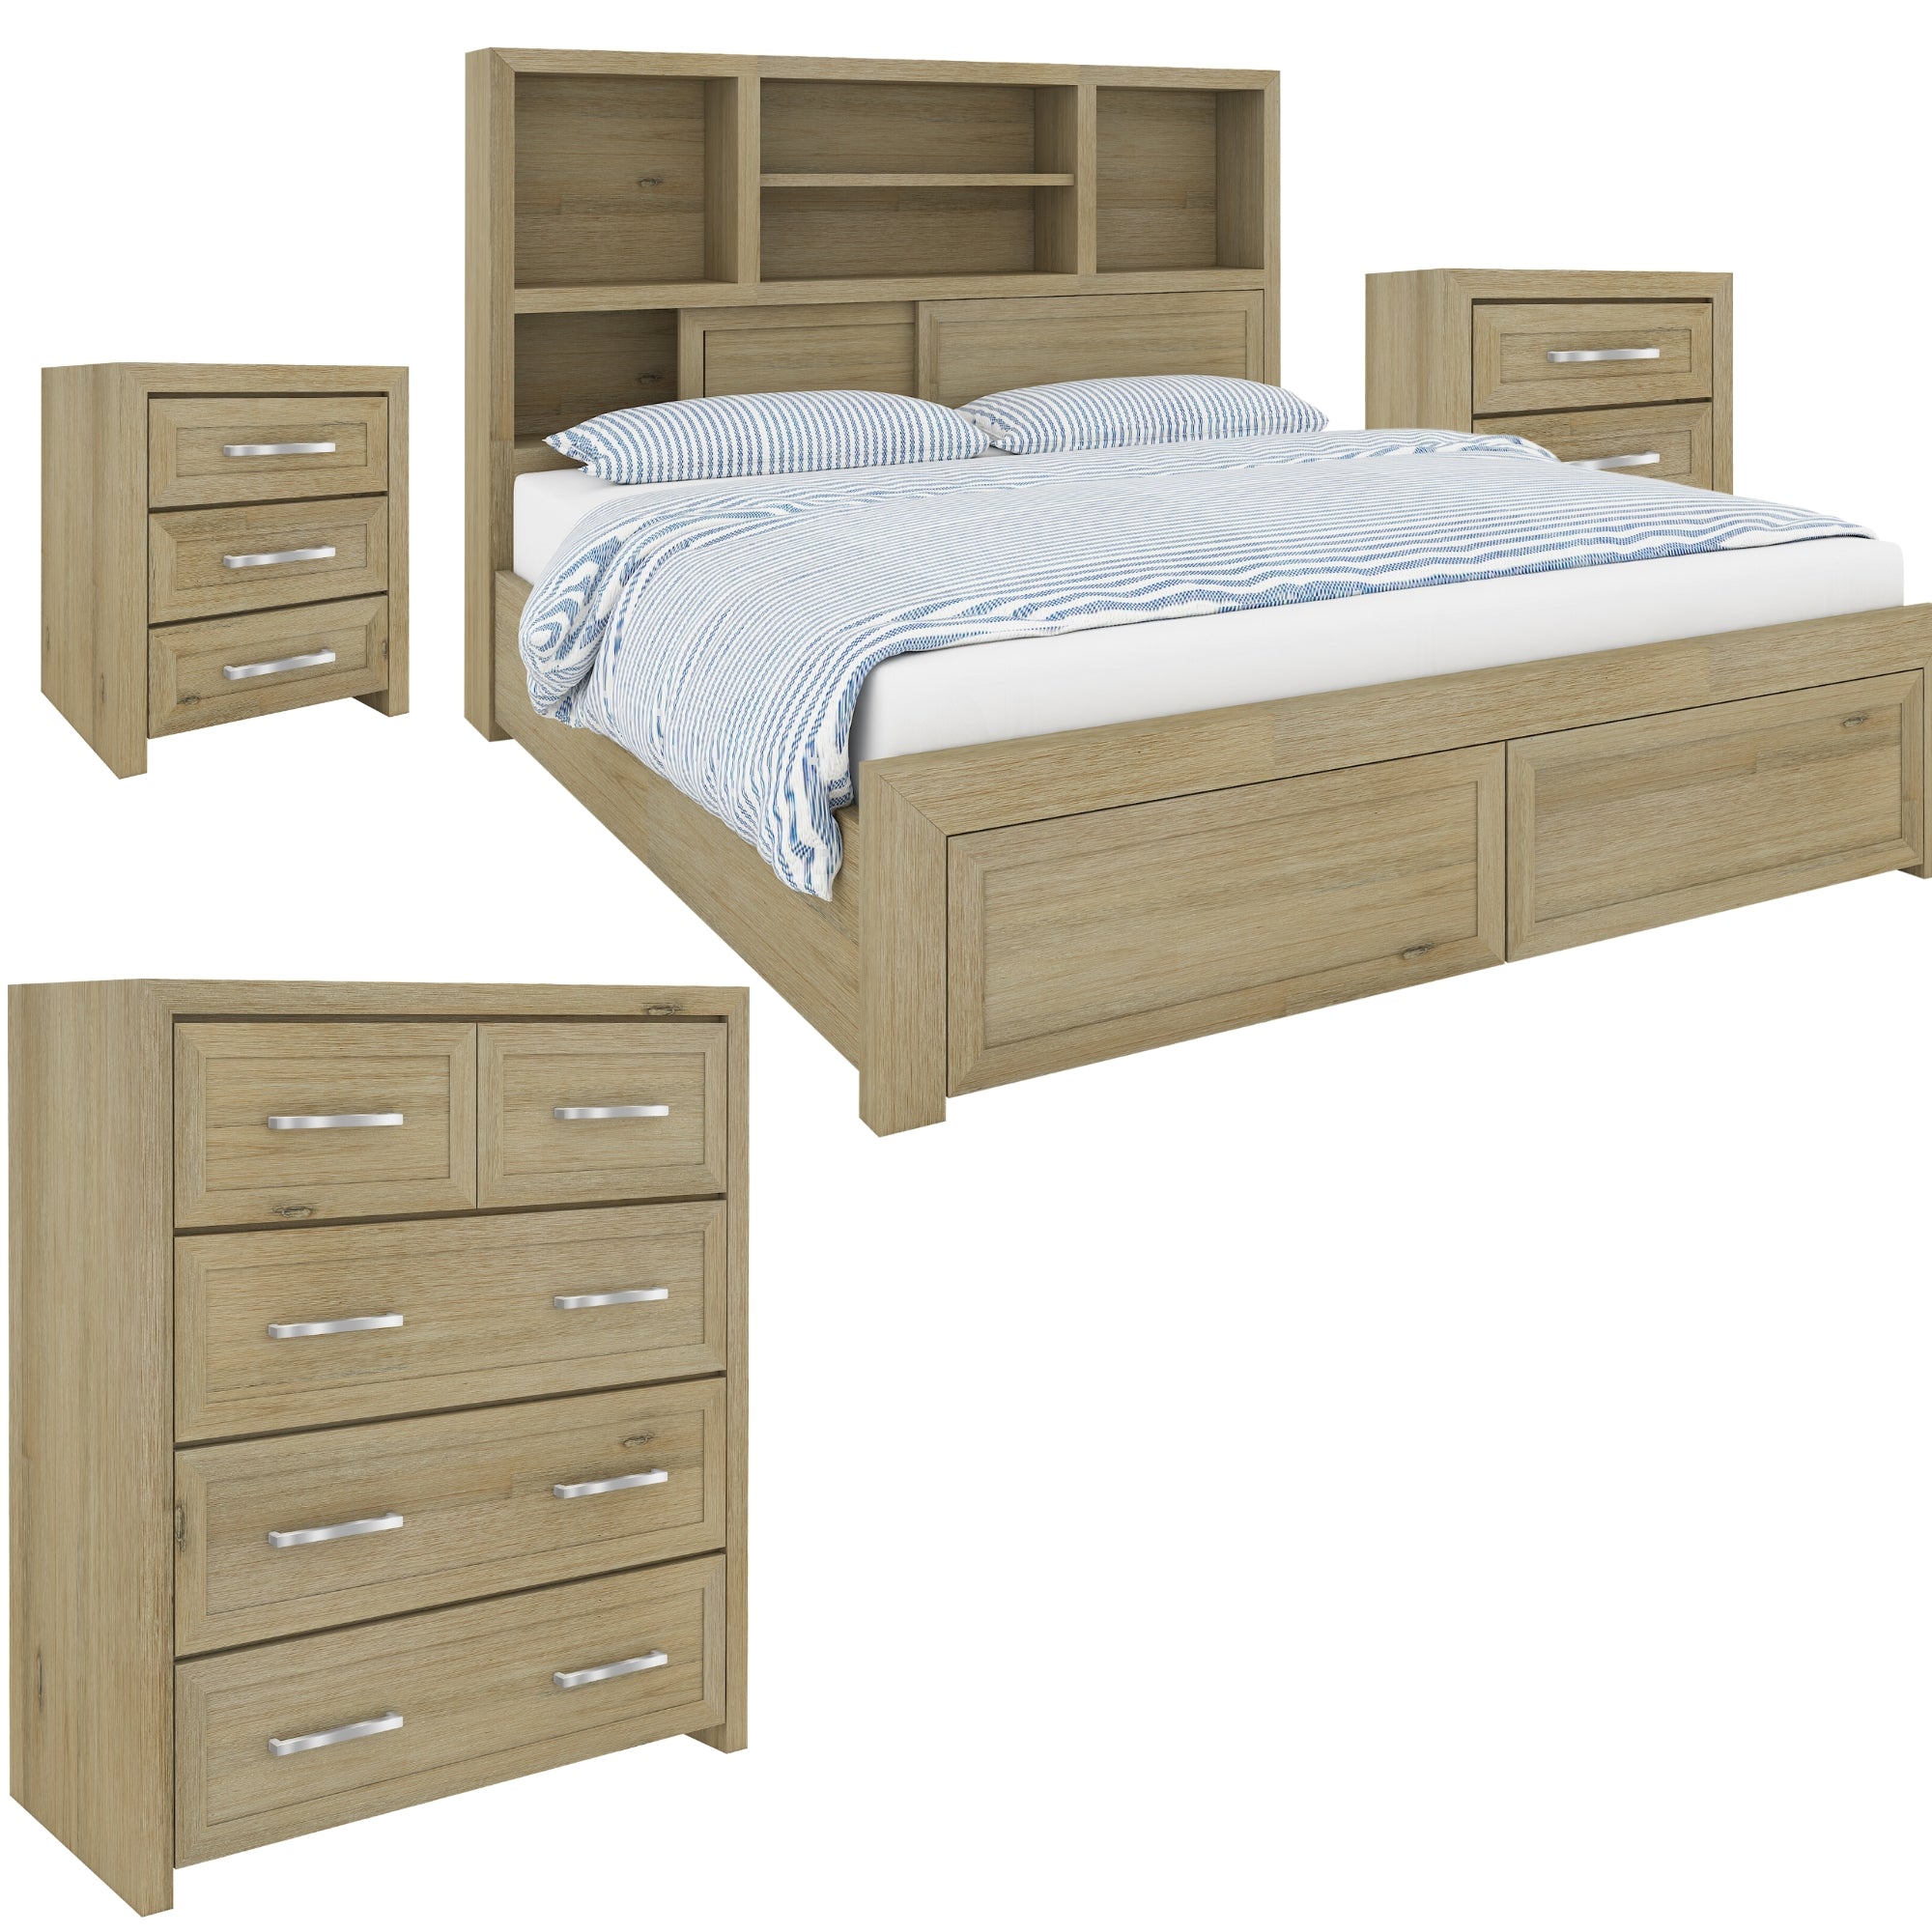 Gracelyn King Bed Frame Solid Wood Mattress Base With Storage Drawers - Smoke - SILBERSHELL